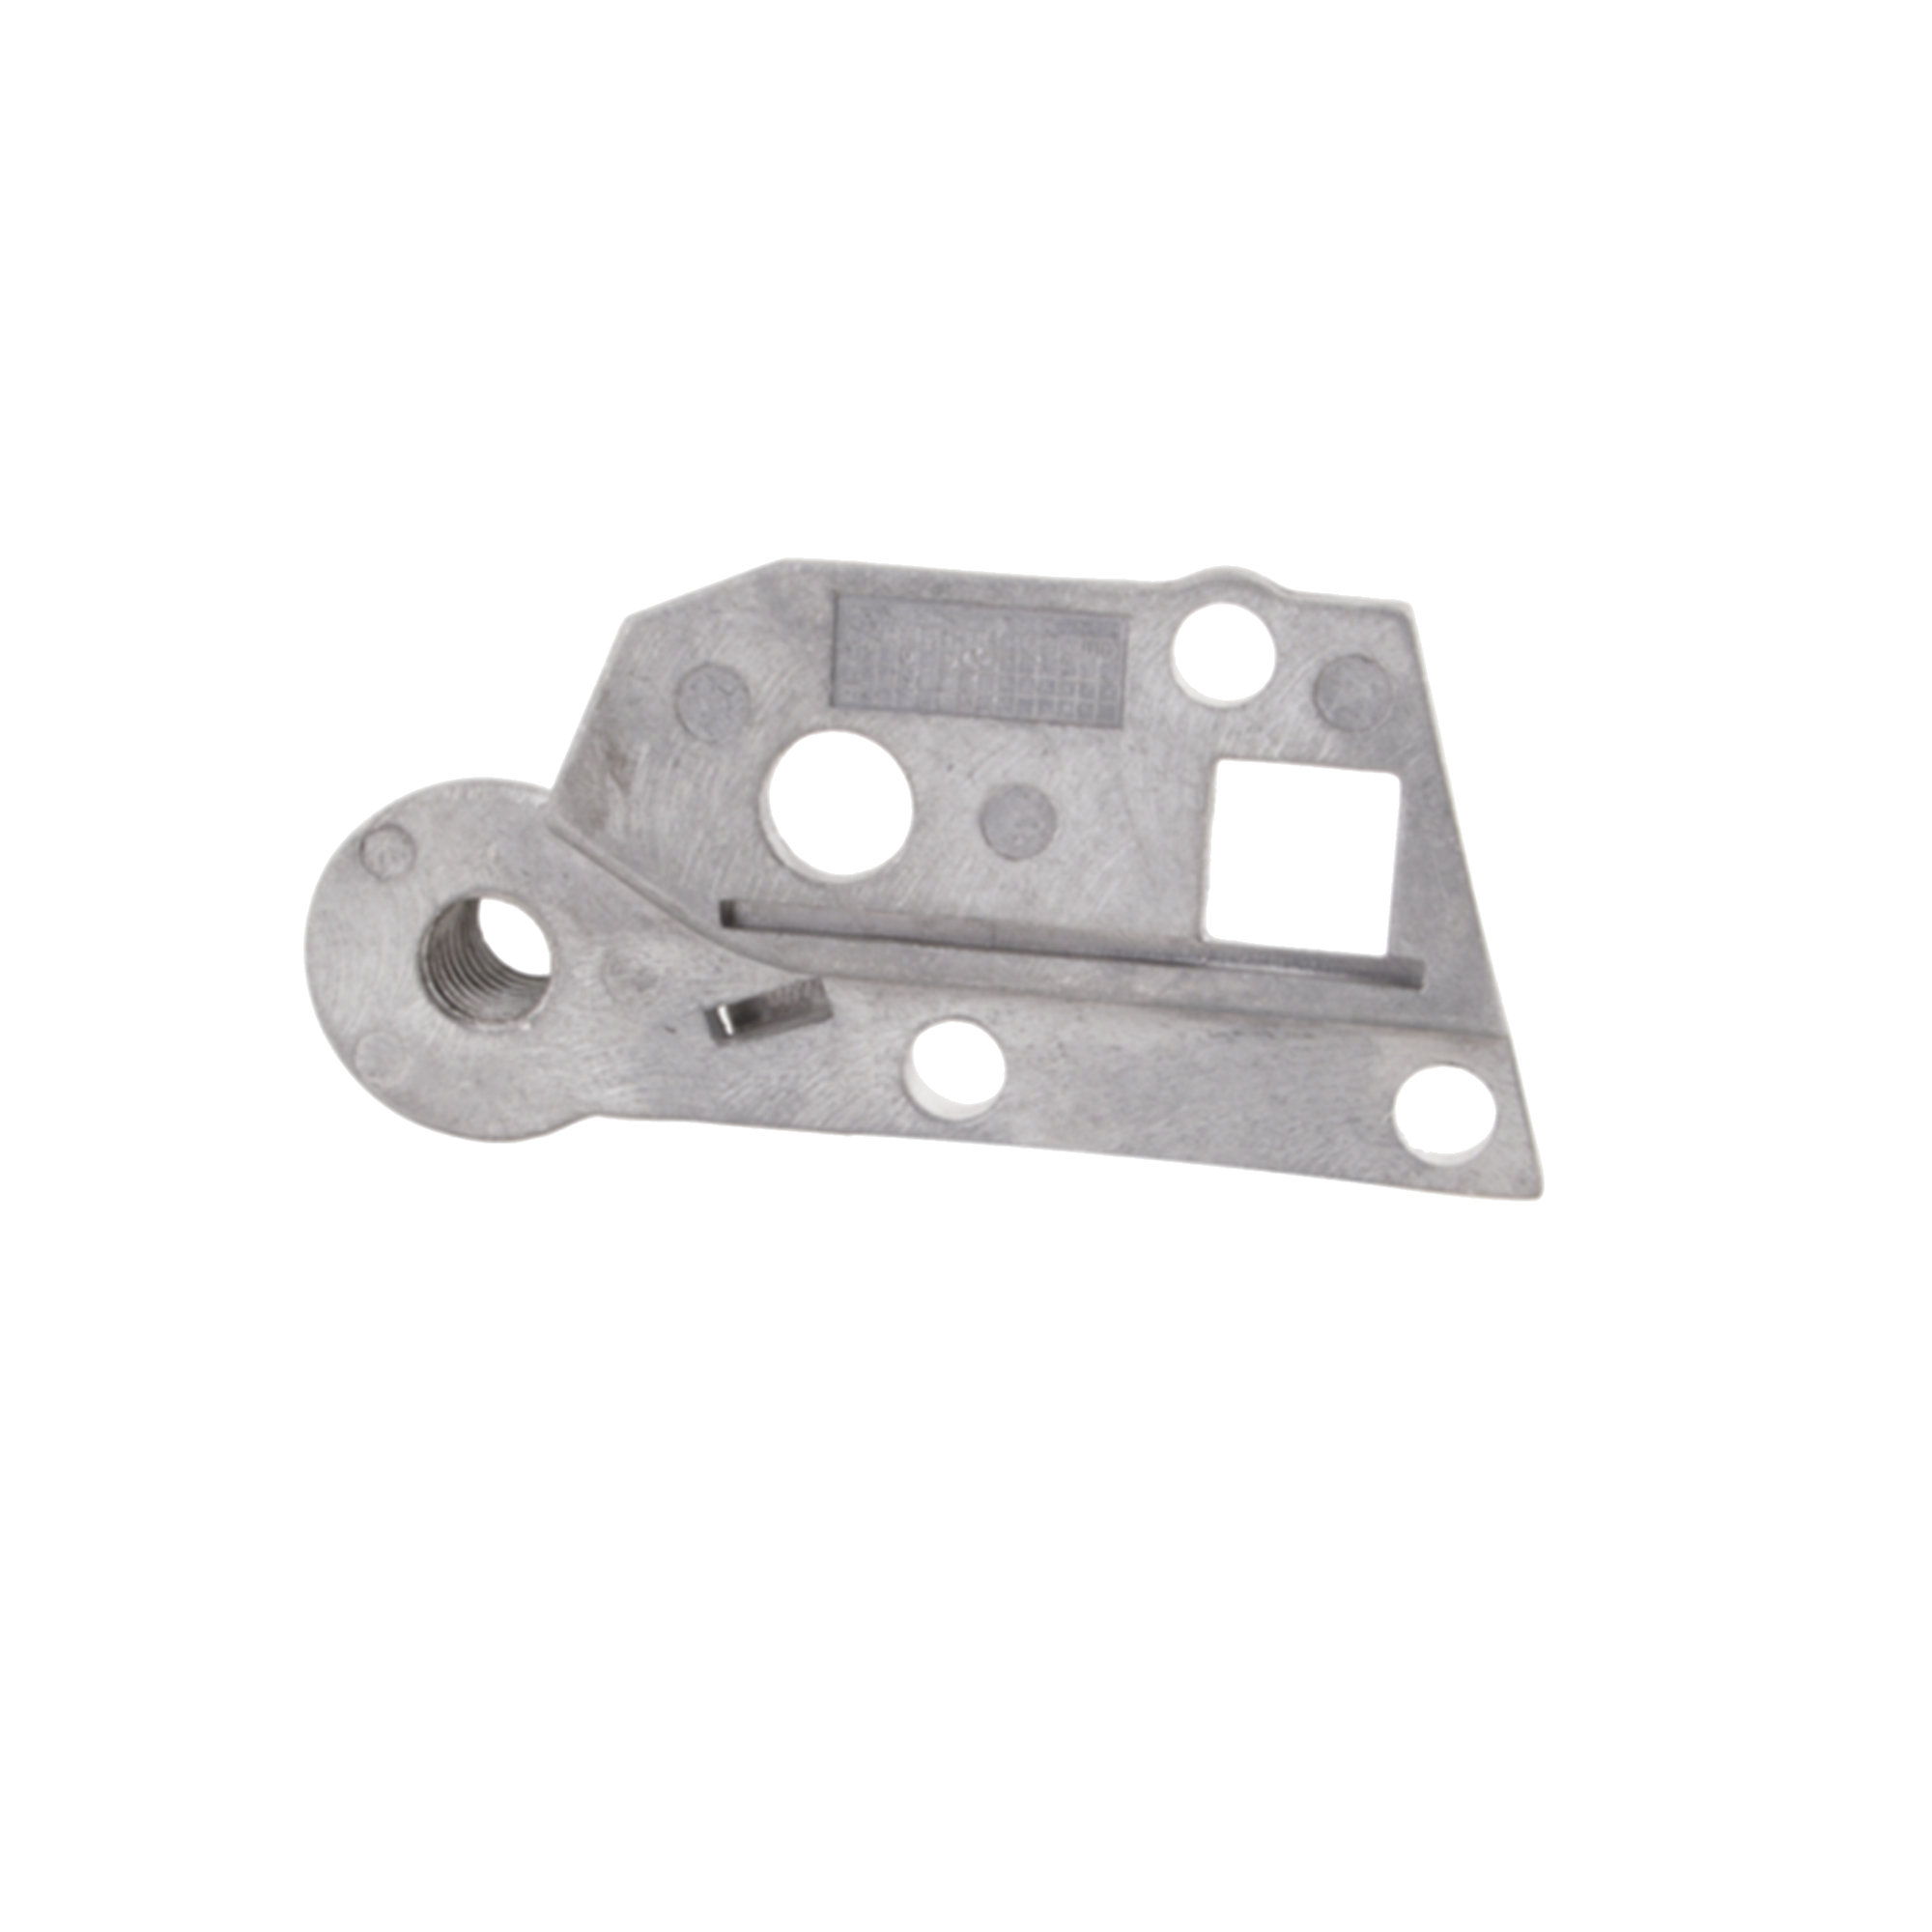 Magnet Support Plate